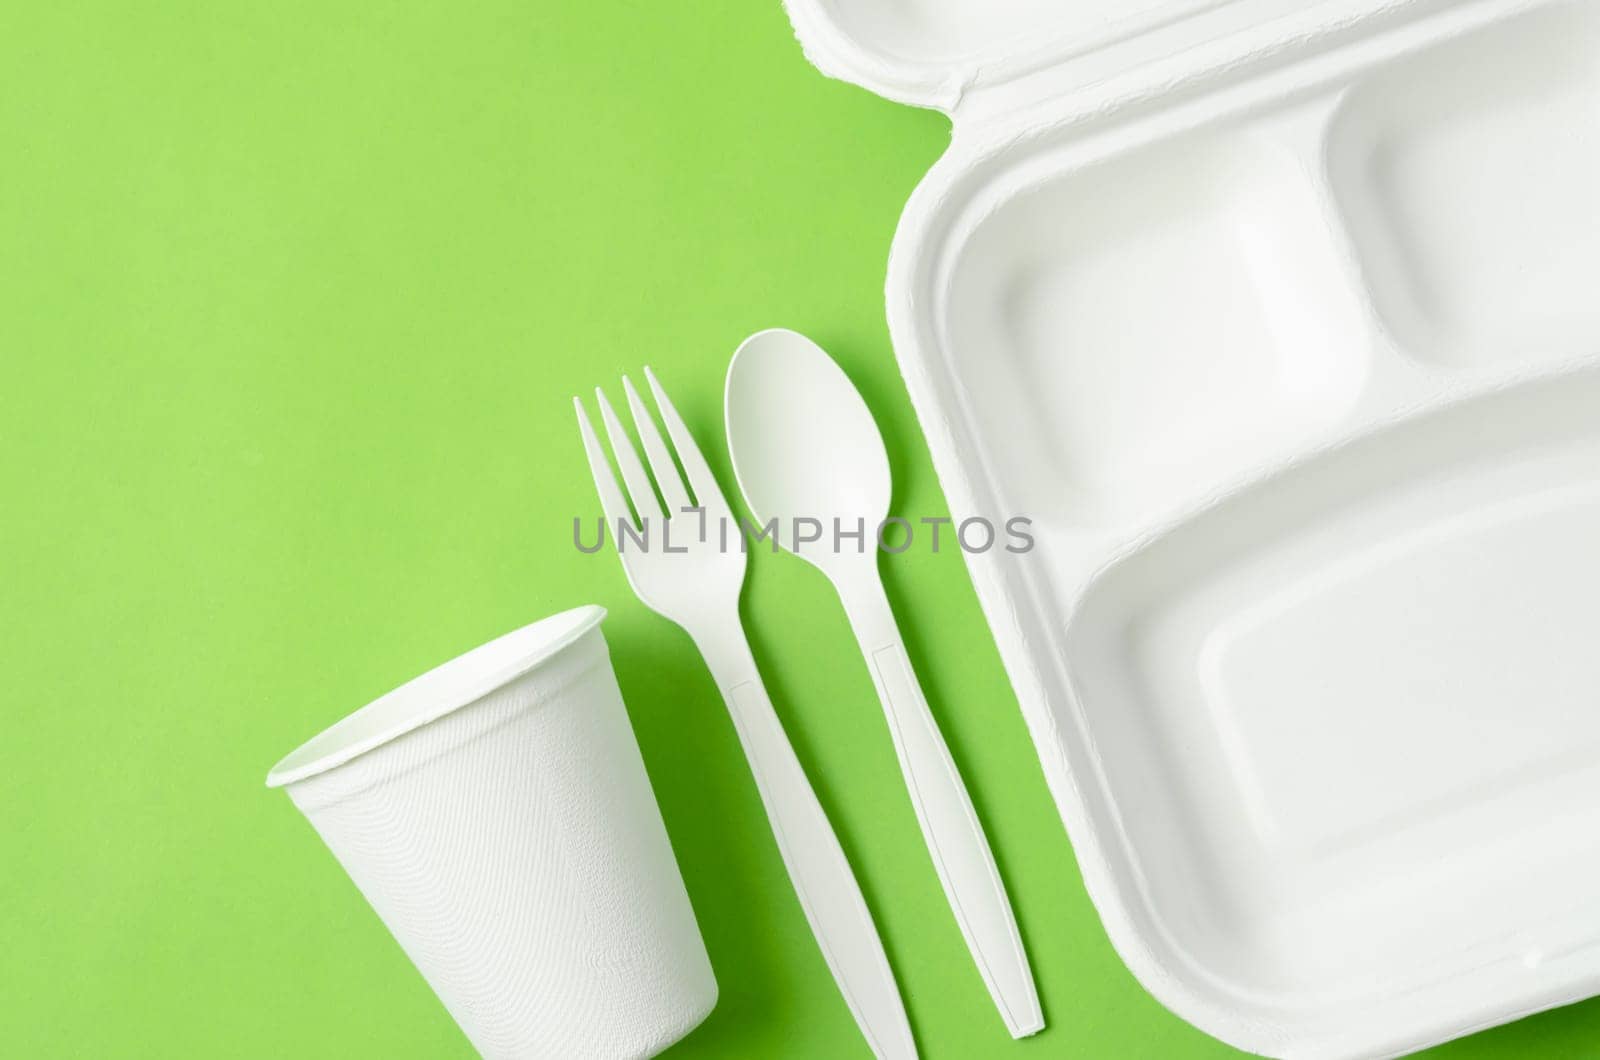 The Eco friendly biodegradable paper disposable for packaging food and paper glass on green background. by Gamjai